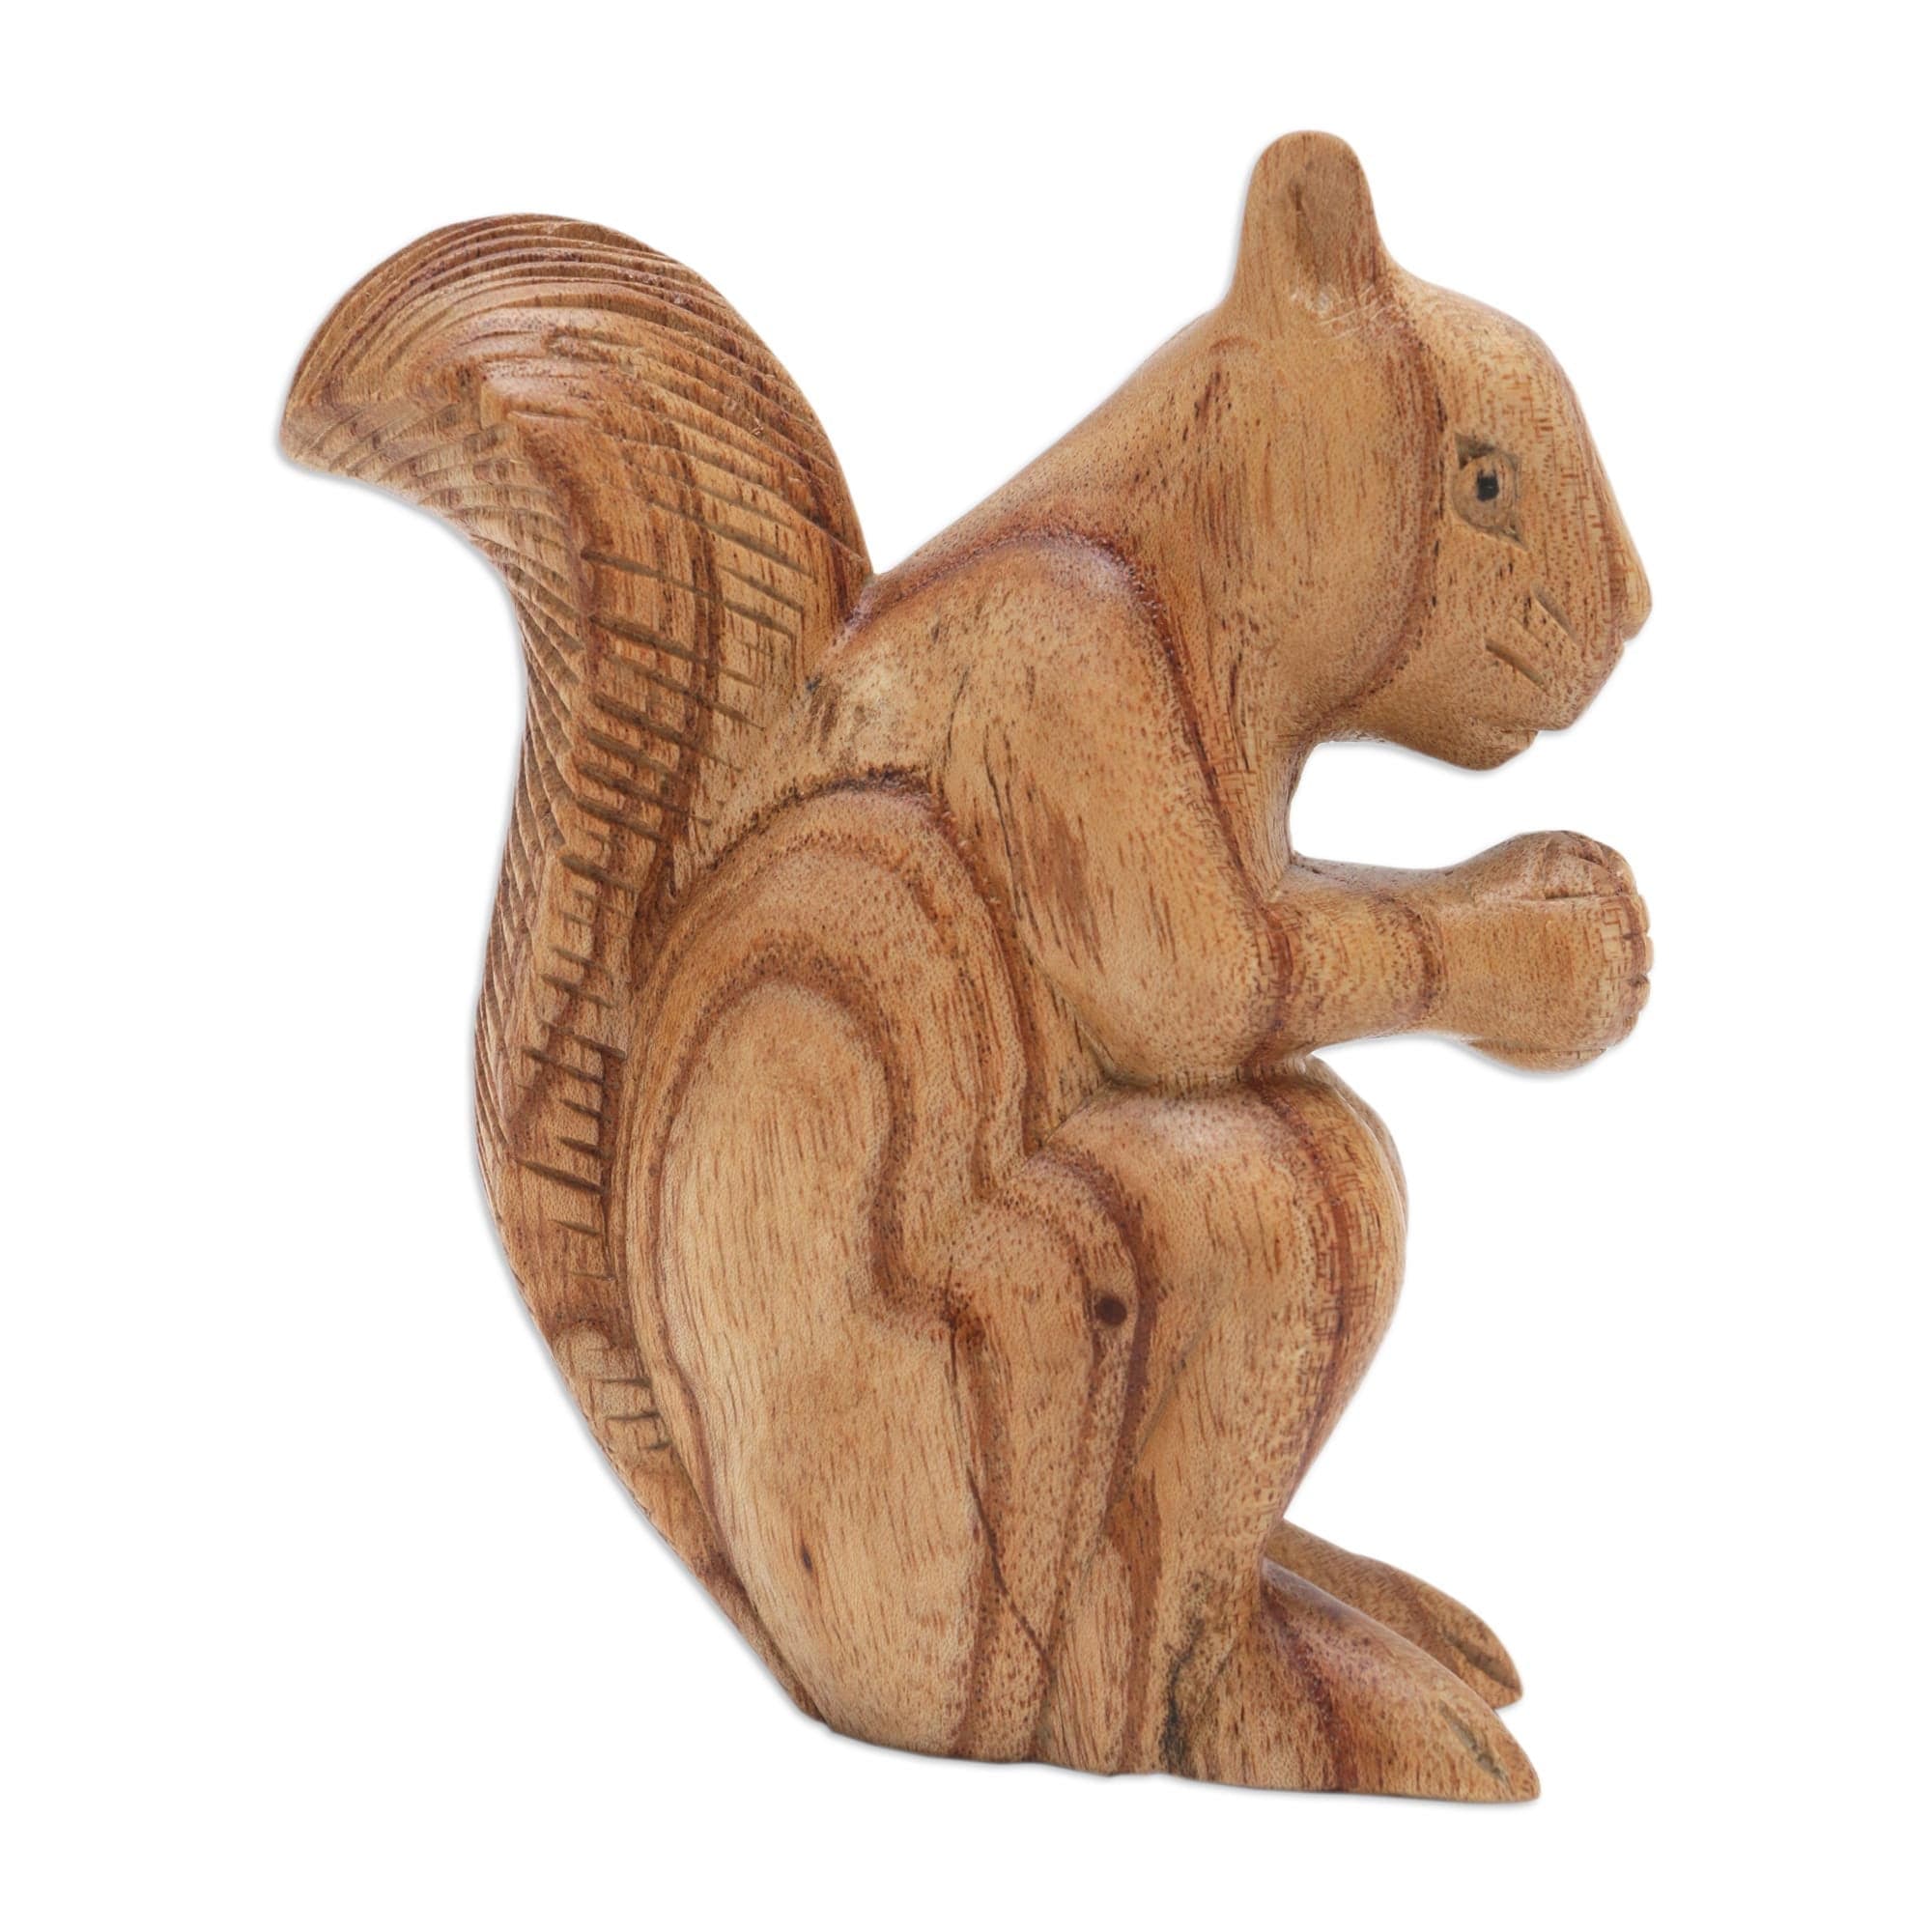 Carving a cherry wood squirrel scoop! A new woodcarving project